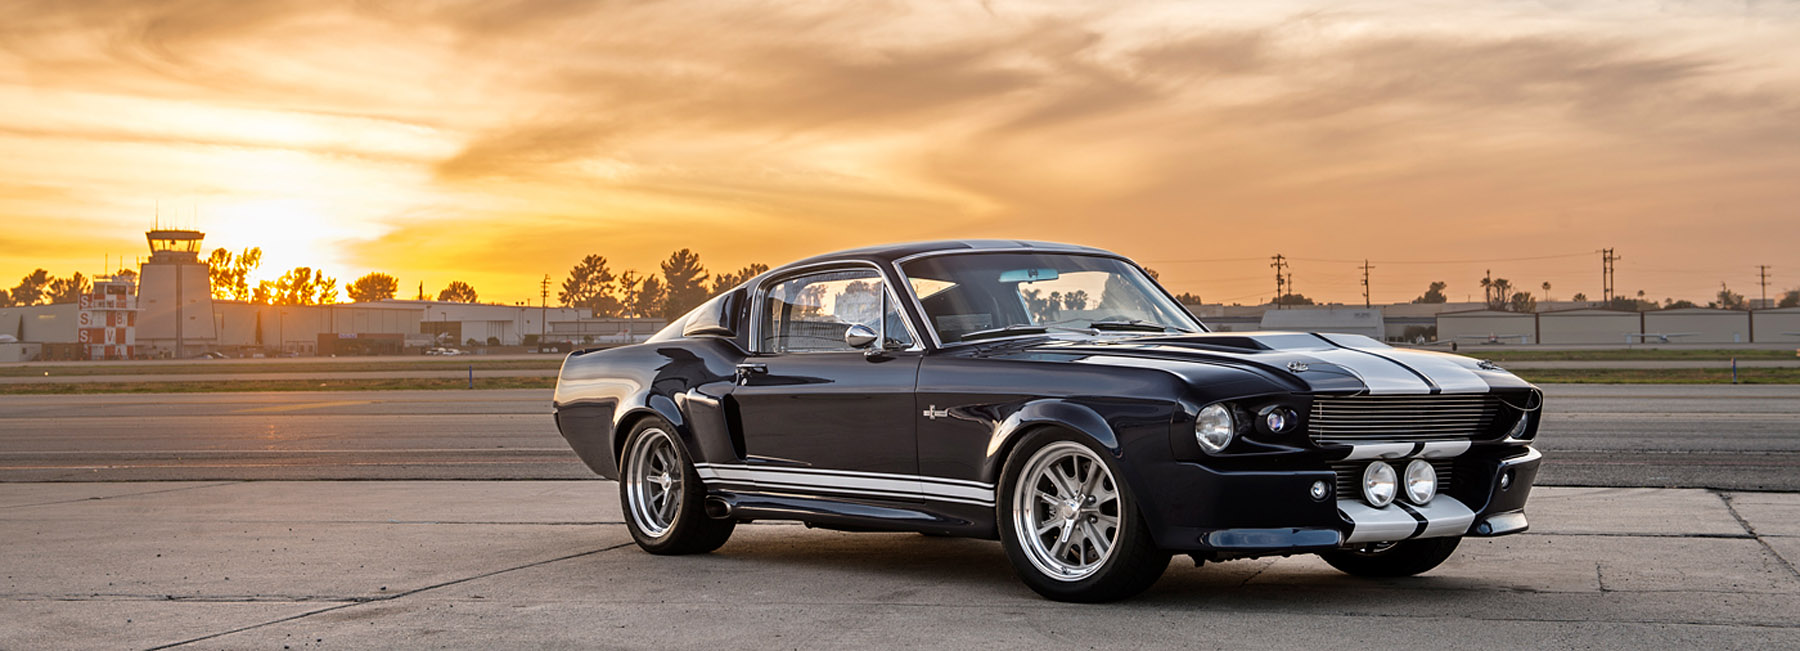 fusion motor can build your own eleanor mustang from gone in 60 seconds